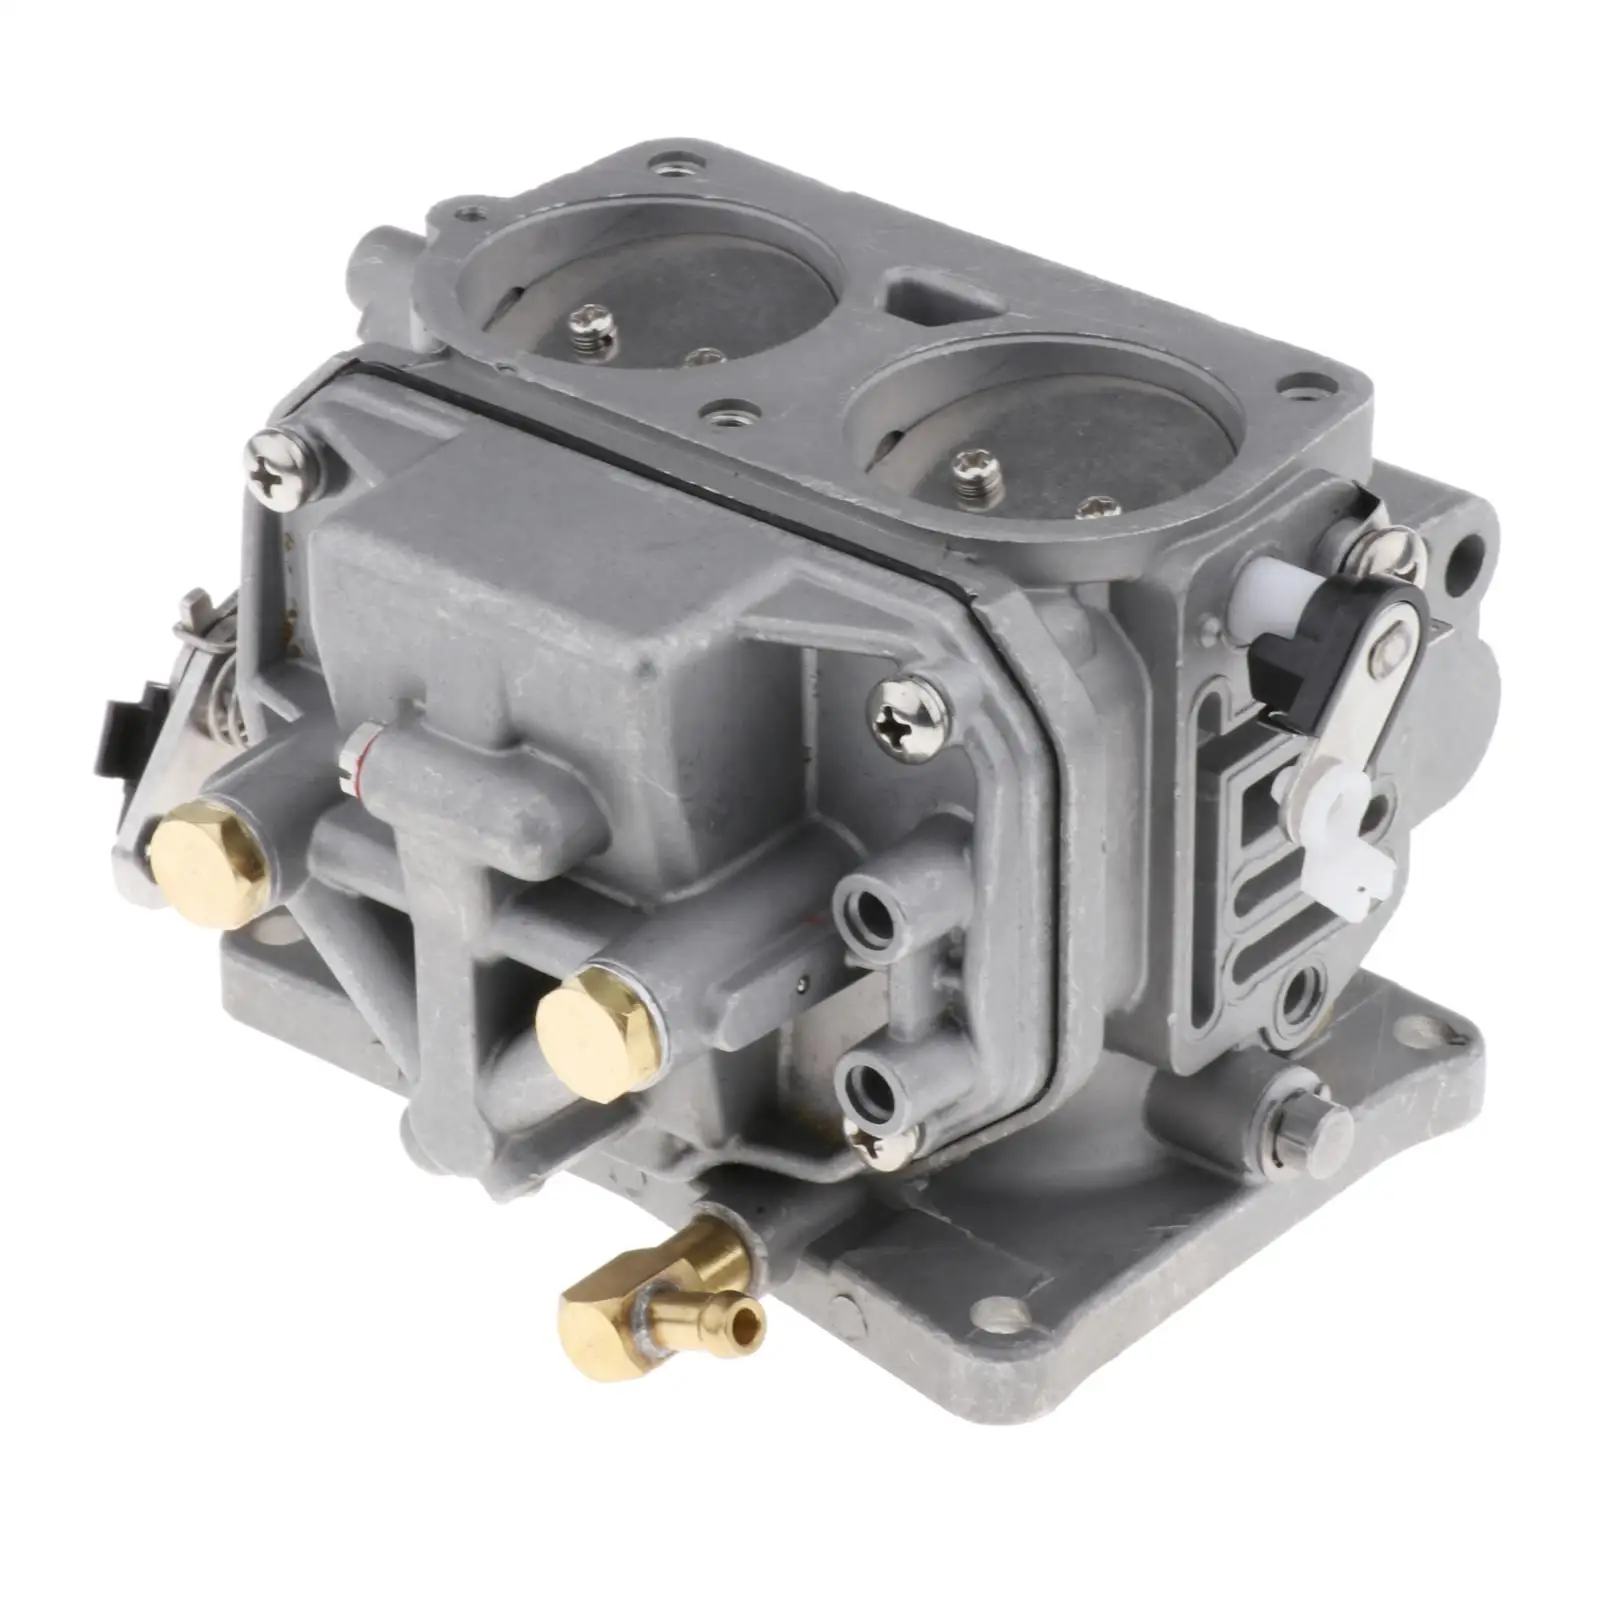 

Carburetor Carb Assy For Yamaha 40HP J 1986-1993 For Chinese Parsun T36J T40J 2 Stroke Outboard Engine Replacement 6F5-14301-00